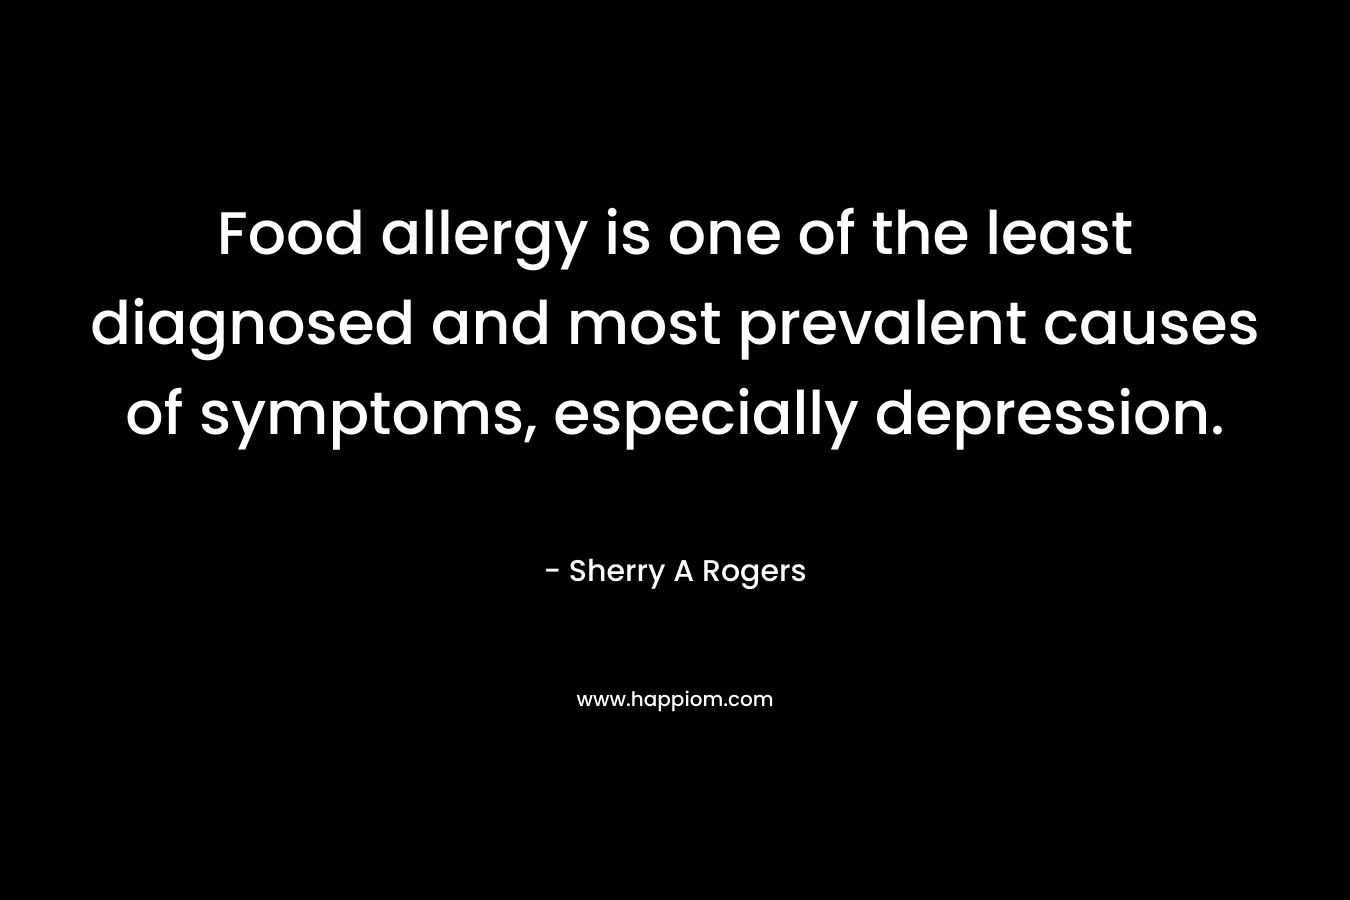 Food allergy is one of the least diagnosed and most prevalent causes of symptoms, especially depression. – Sherry A Rogers